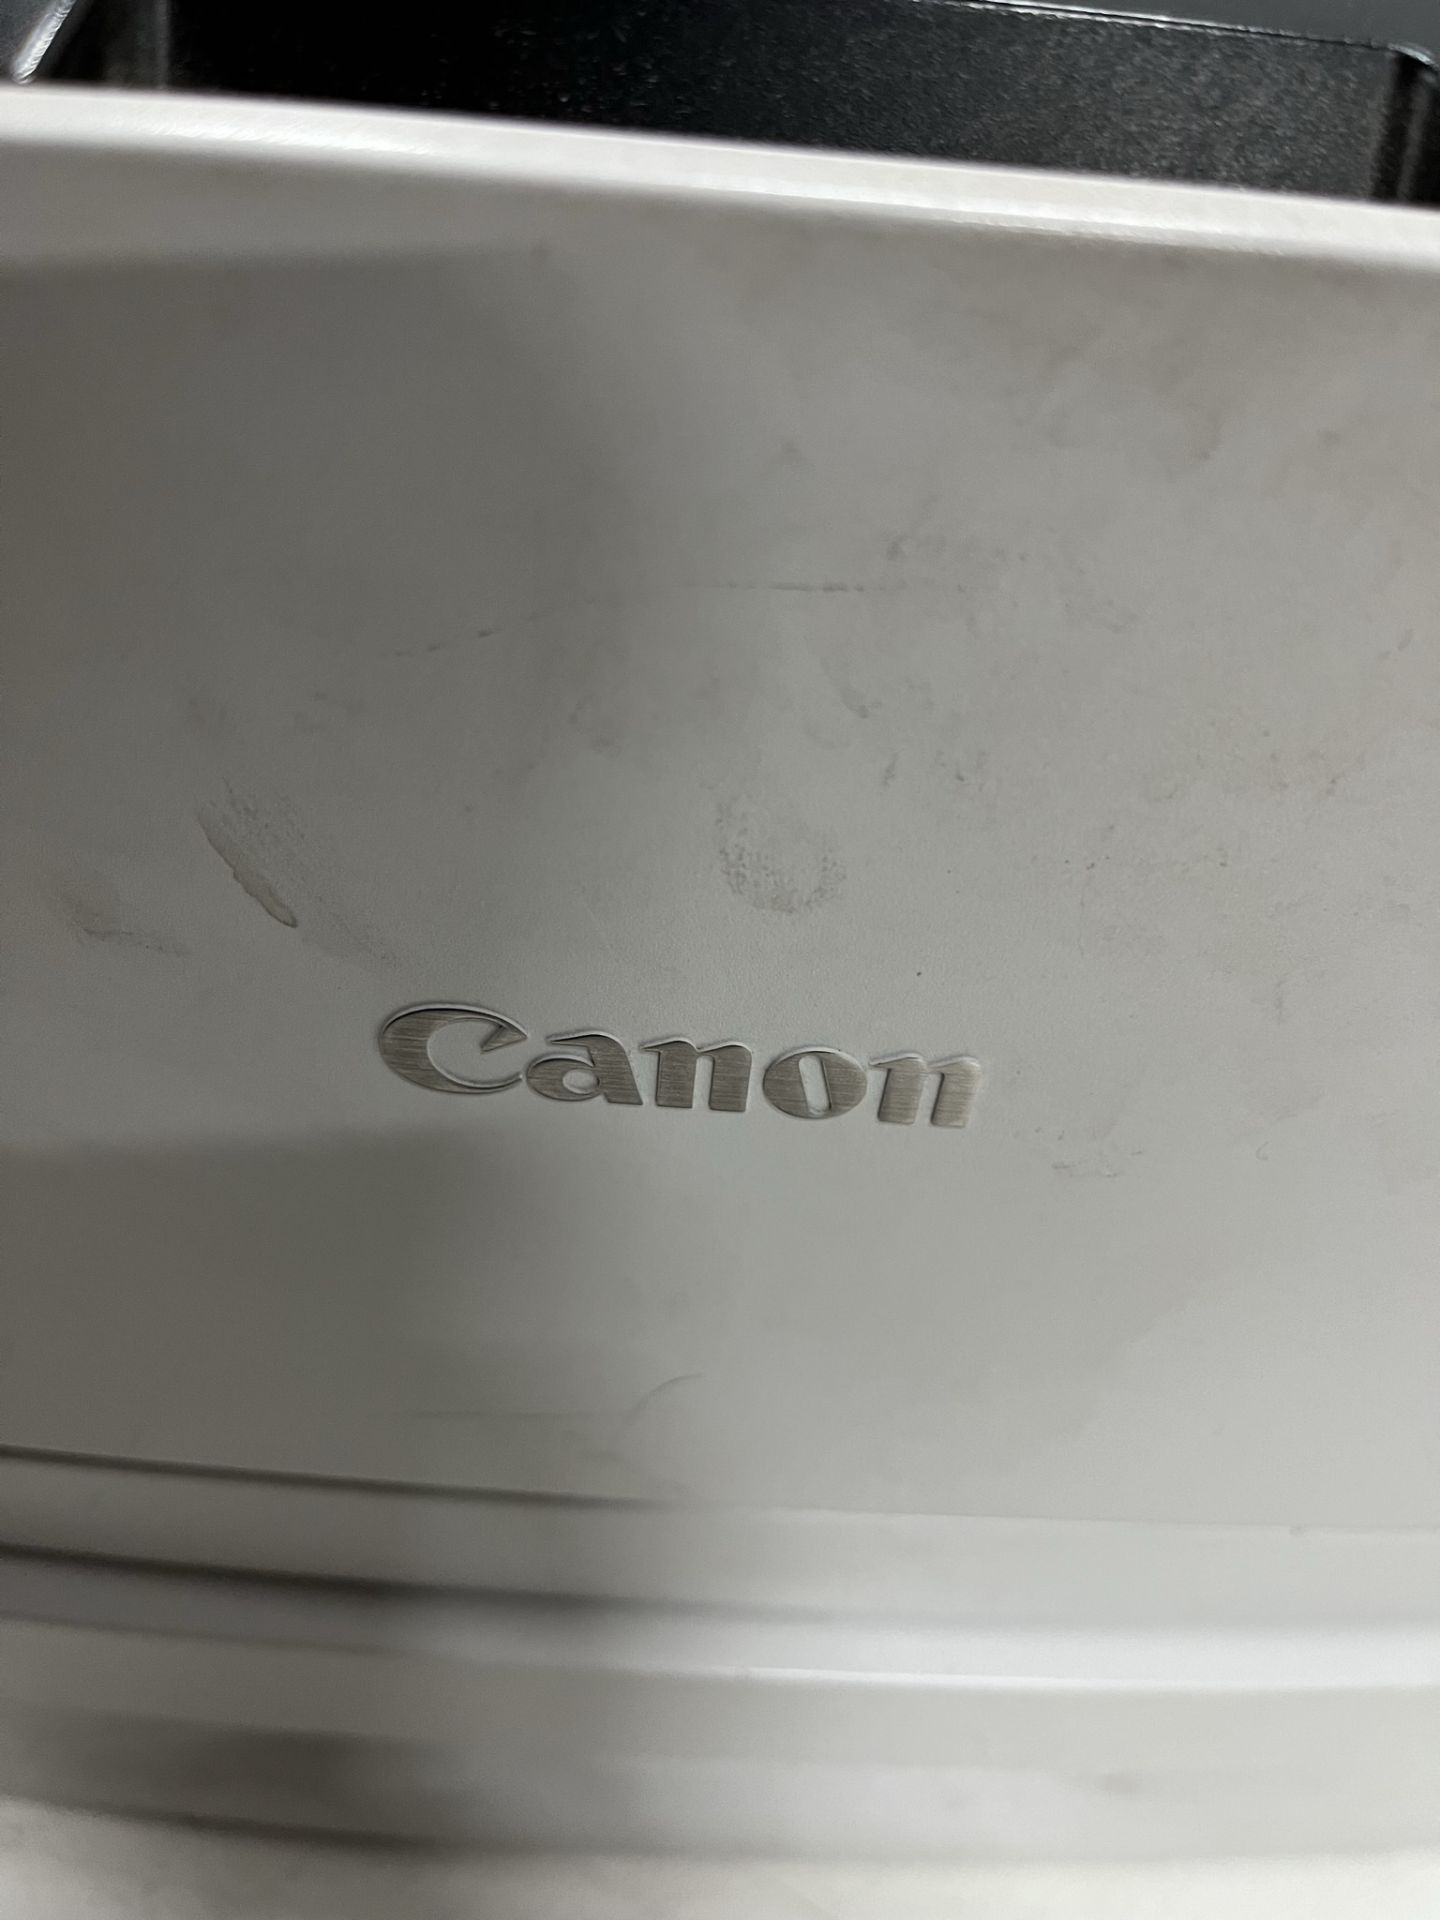 Cannon F161900 Multifunction Printer - Image 8 of 14